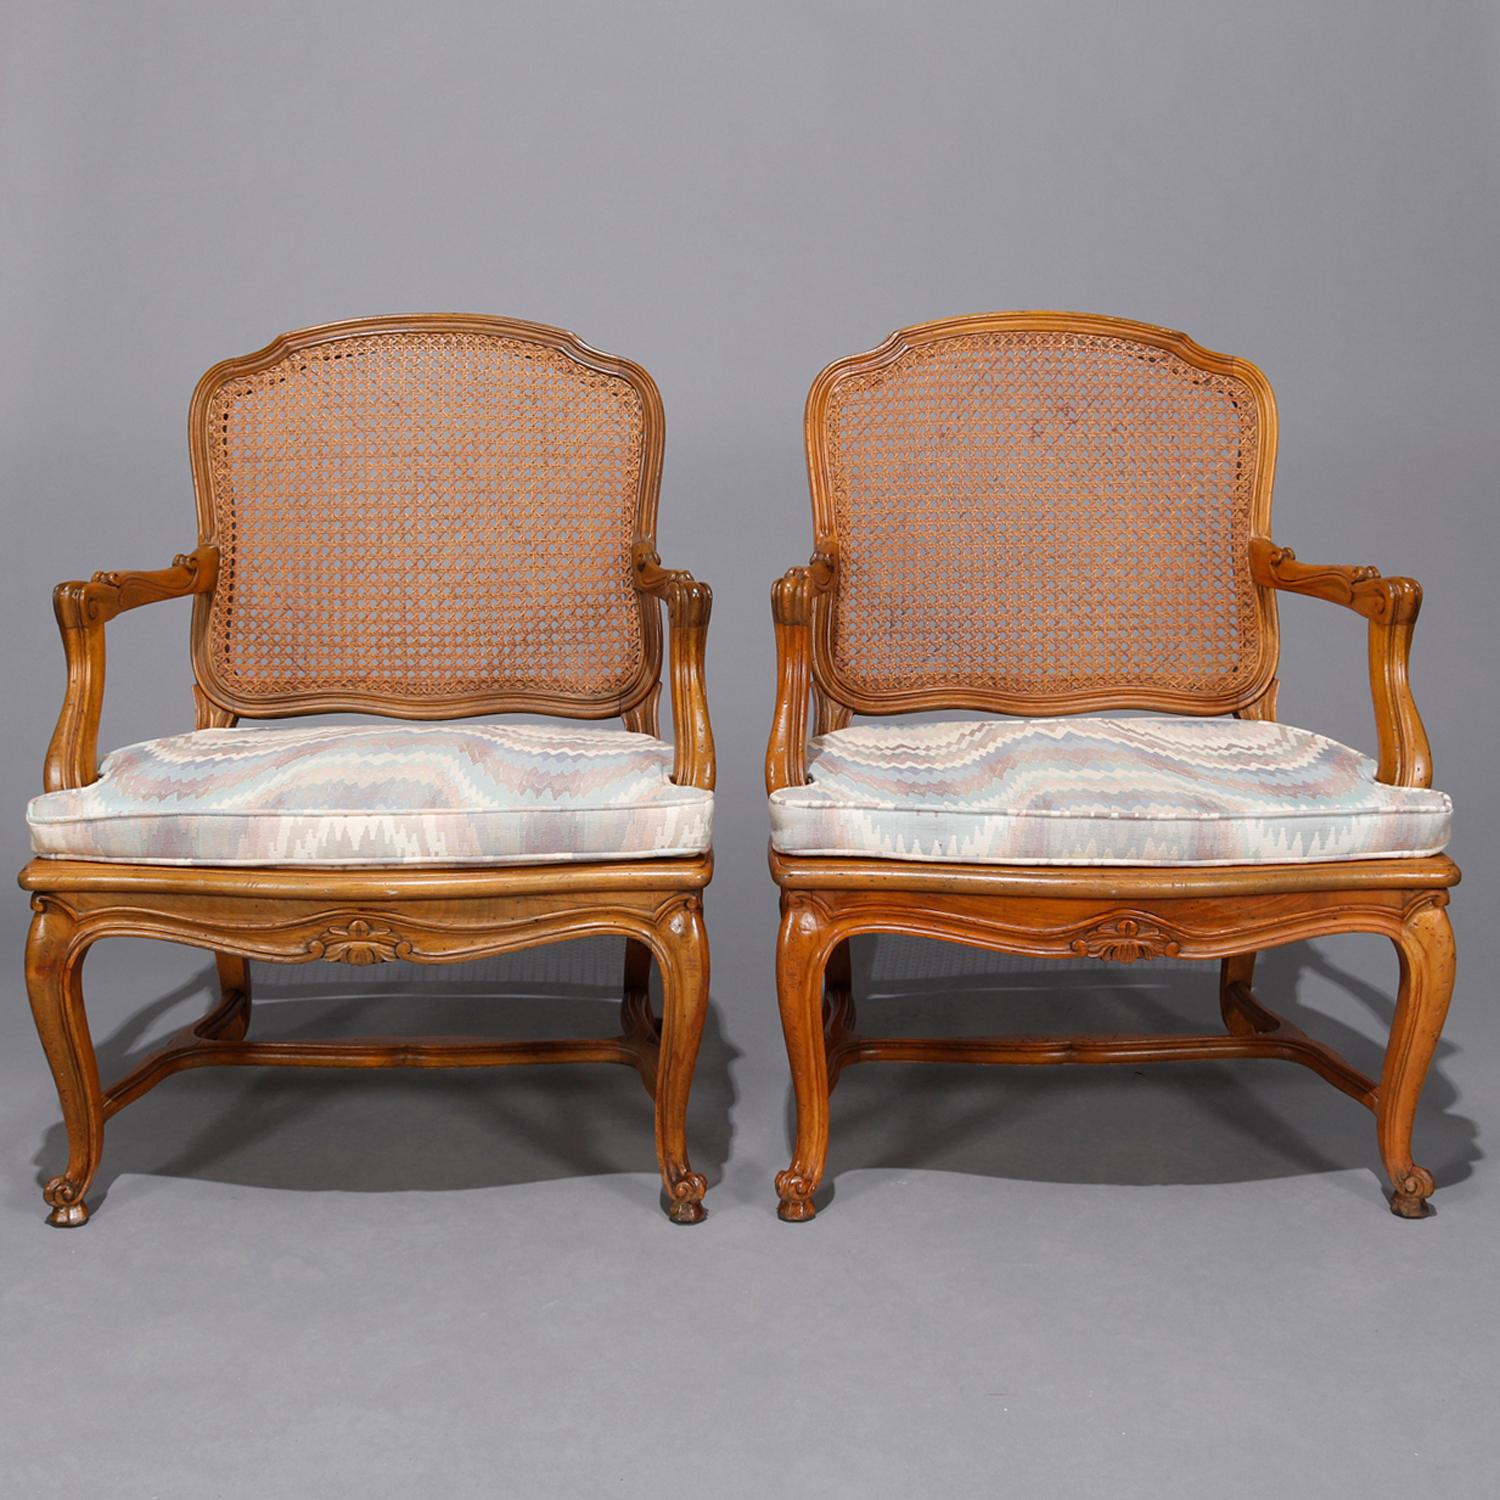 Carved Pair of French Louis XV Fruitwood Pressed Cane Arm Chairs, 19th Century